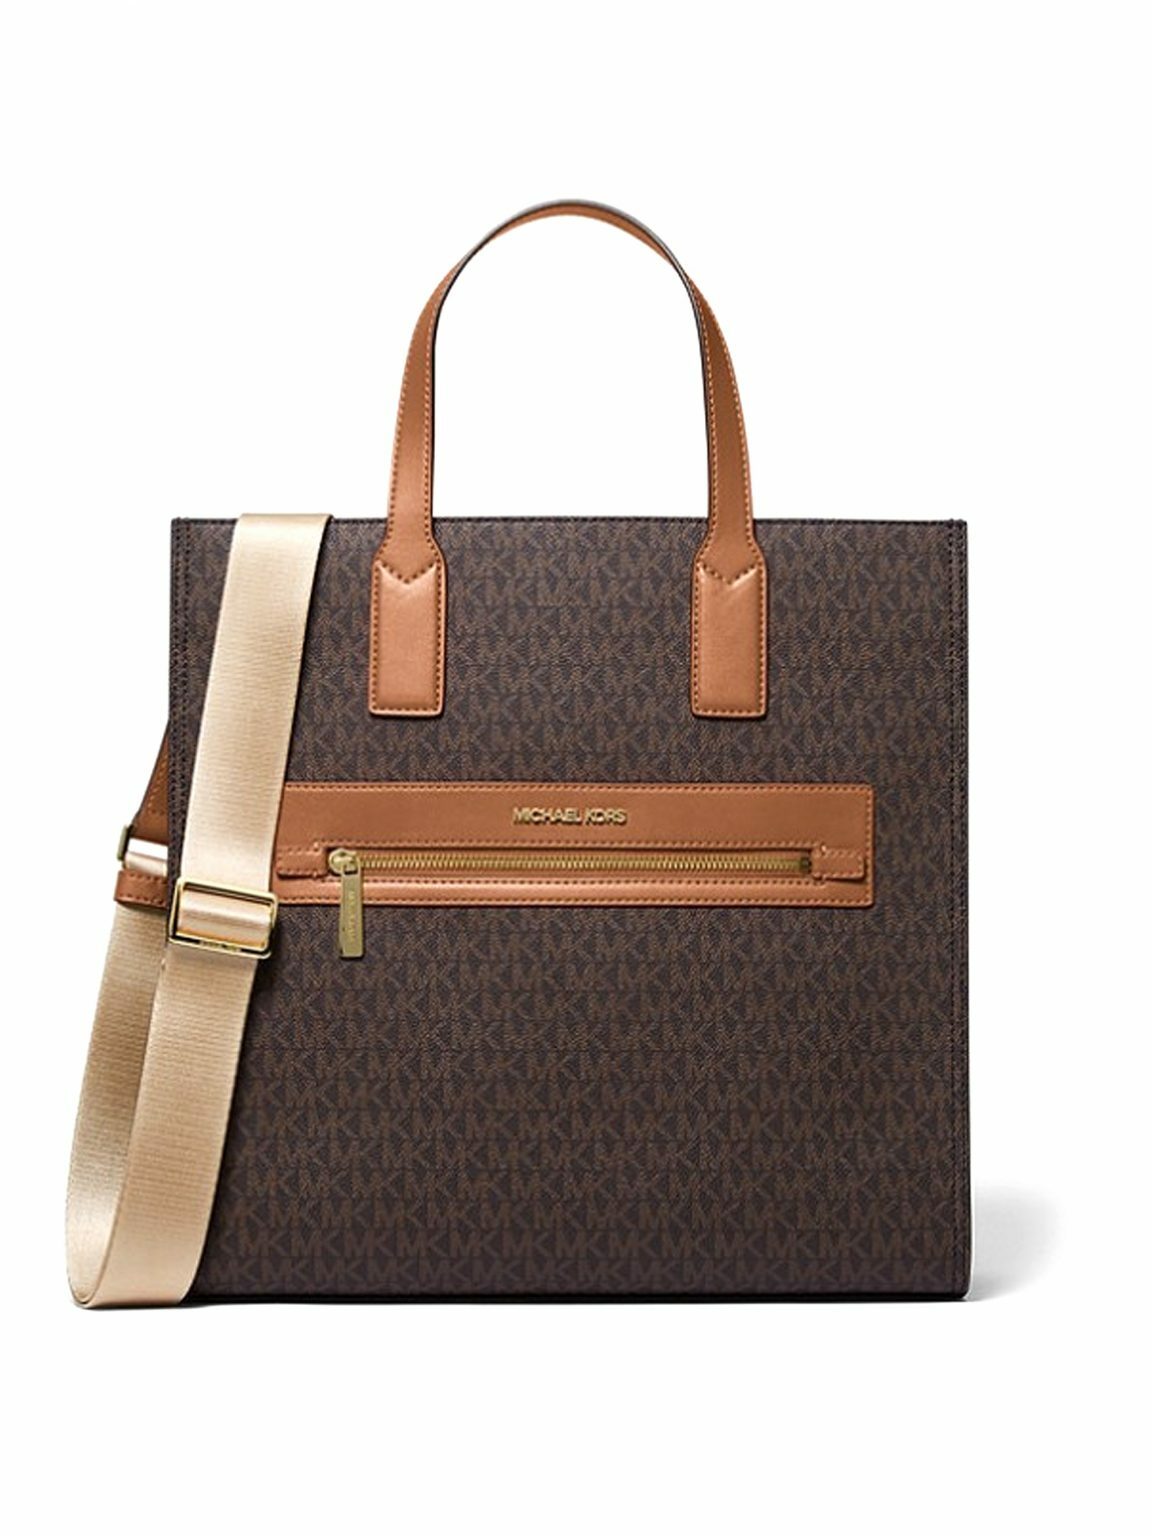 Michael-Kors-Kenly-Large-North-South-Tote-Signature-Brown-Front-1152x1536.jpg